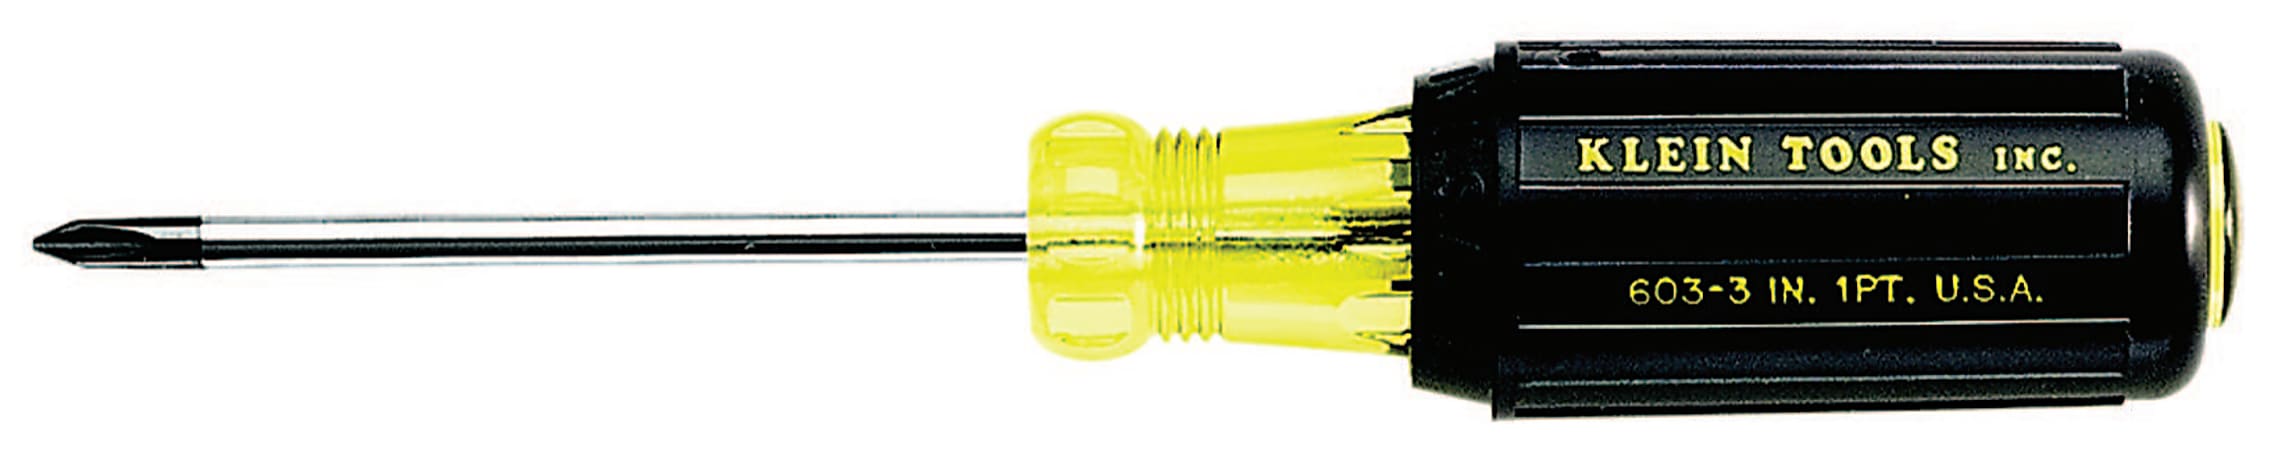 Klein Tools No. 1 Profilated Phillips Tip Screwdriver,